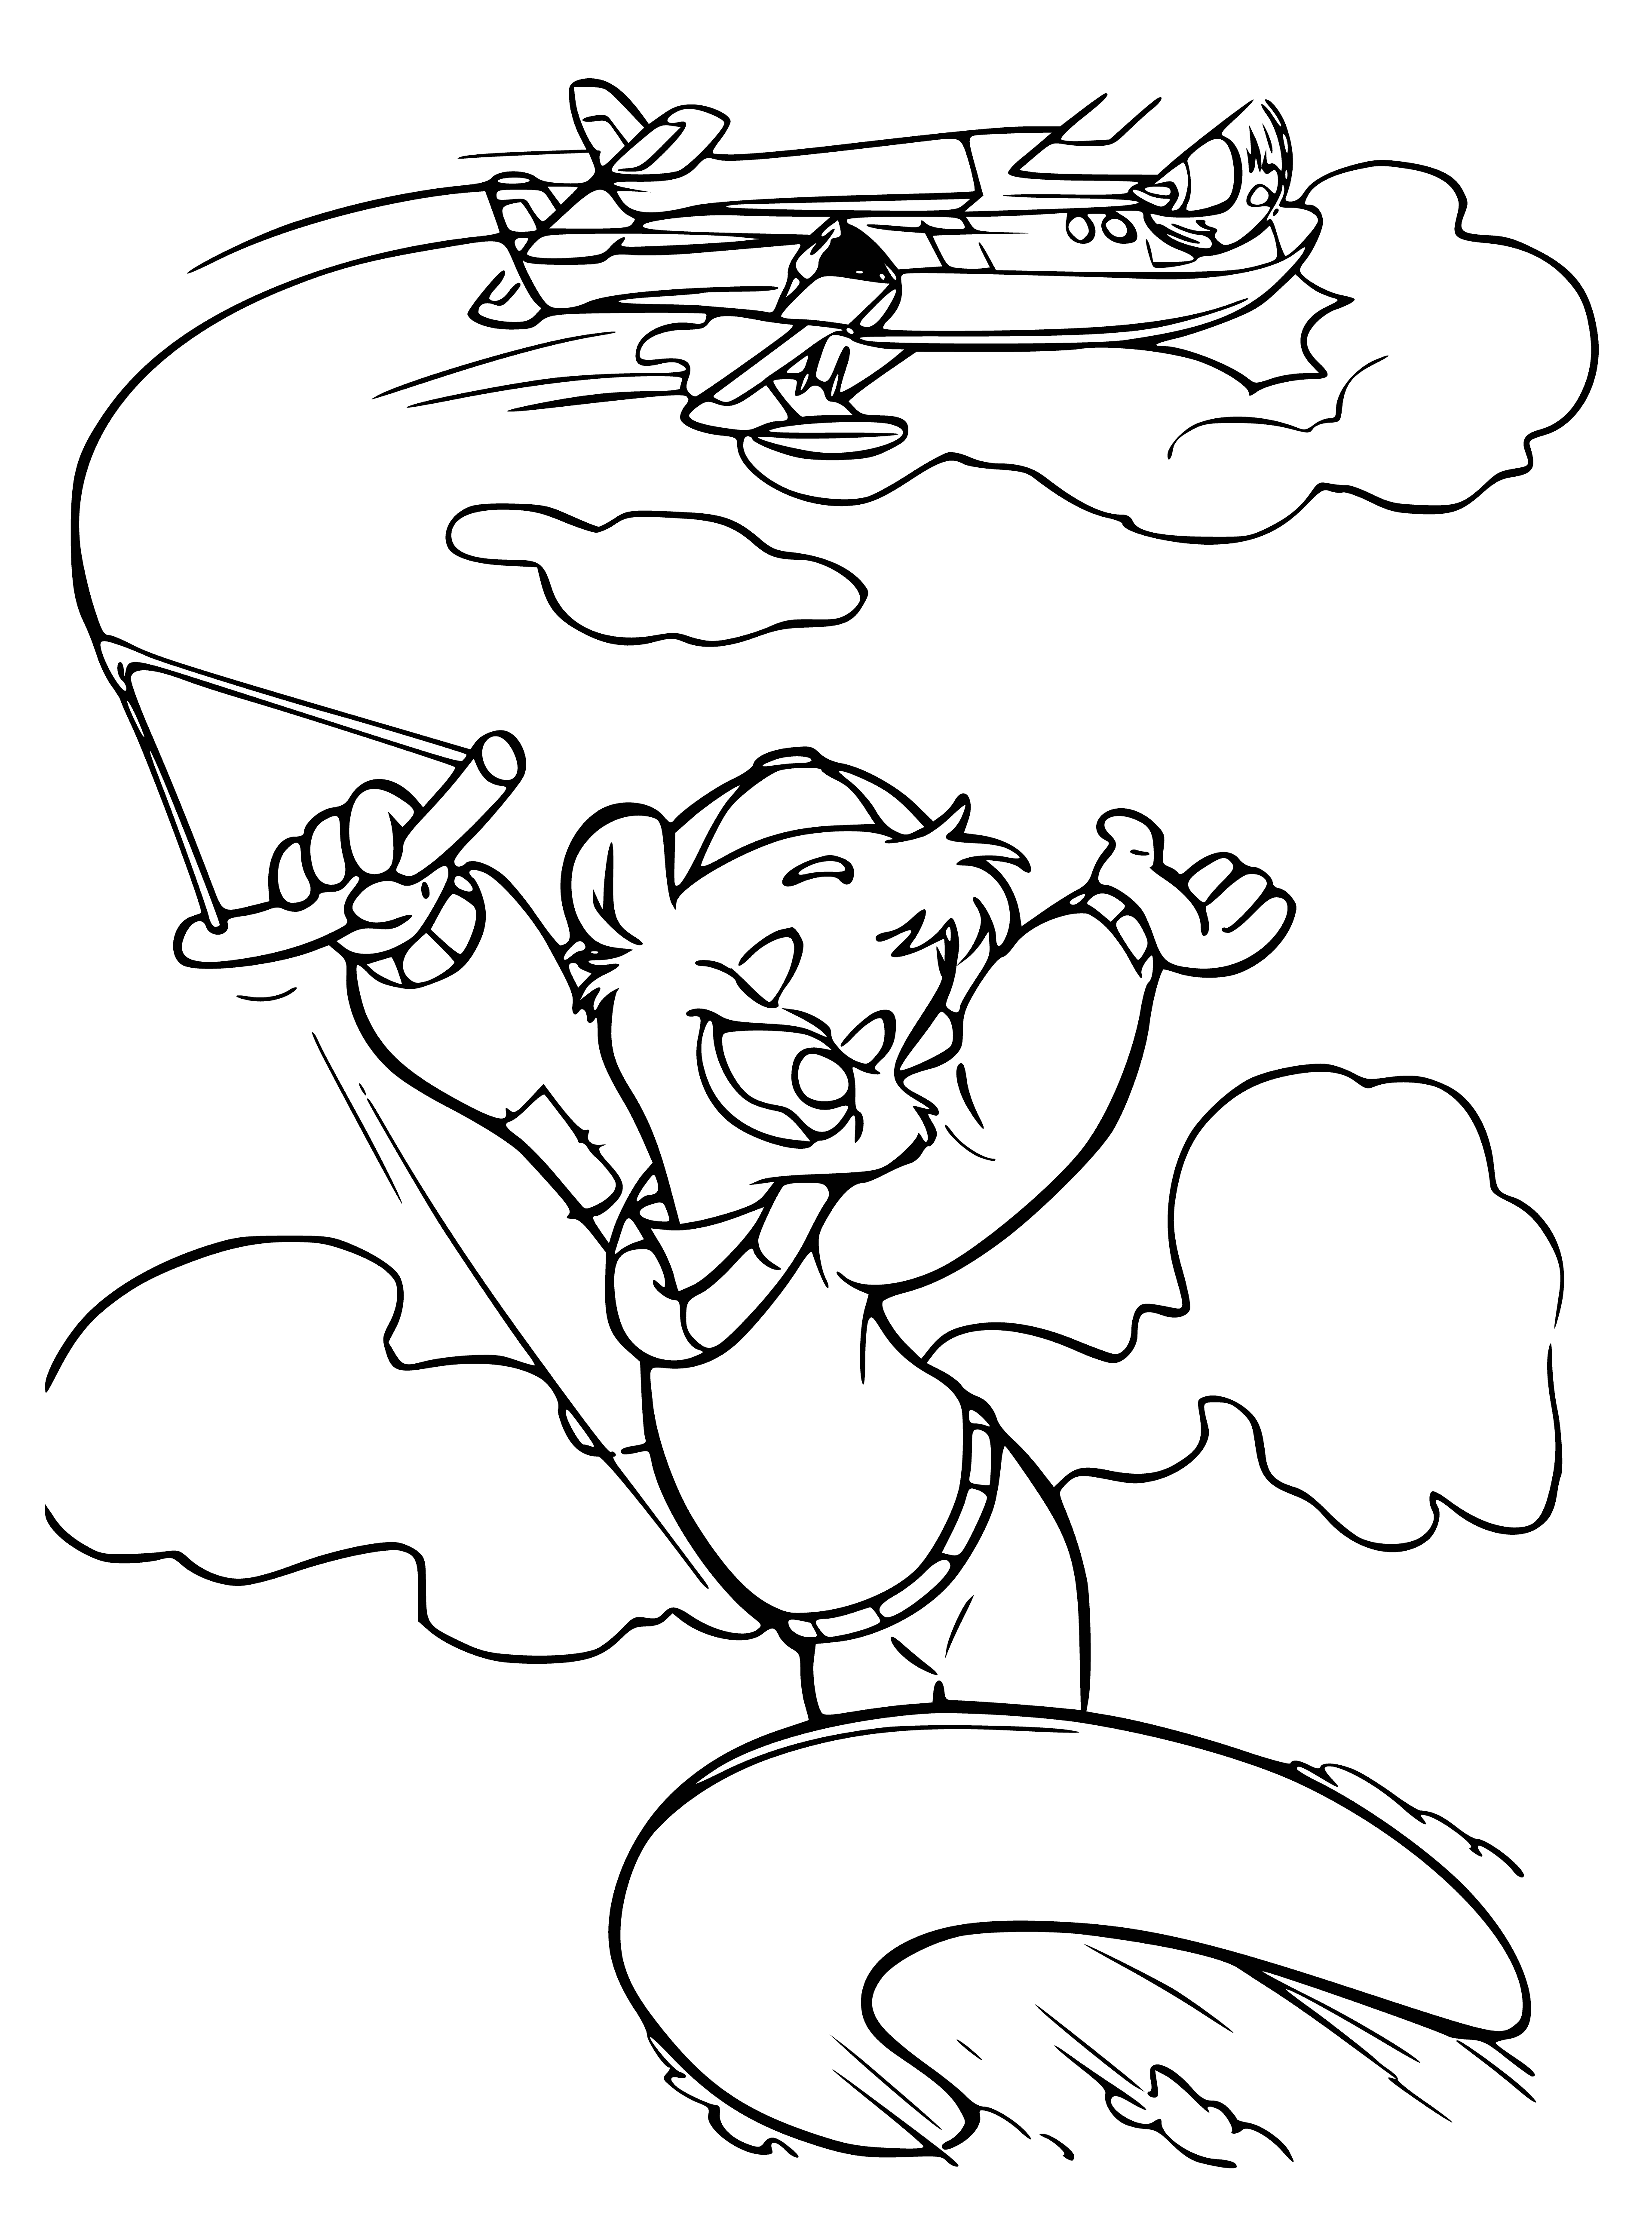 coloring page: Man reads book at open window; he's wearing a blue shirt, has a beard. Book on windowsill in front of him.